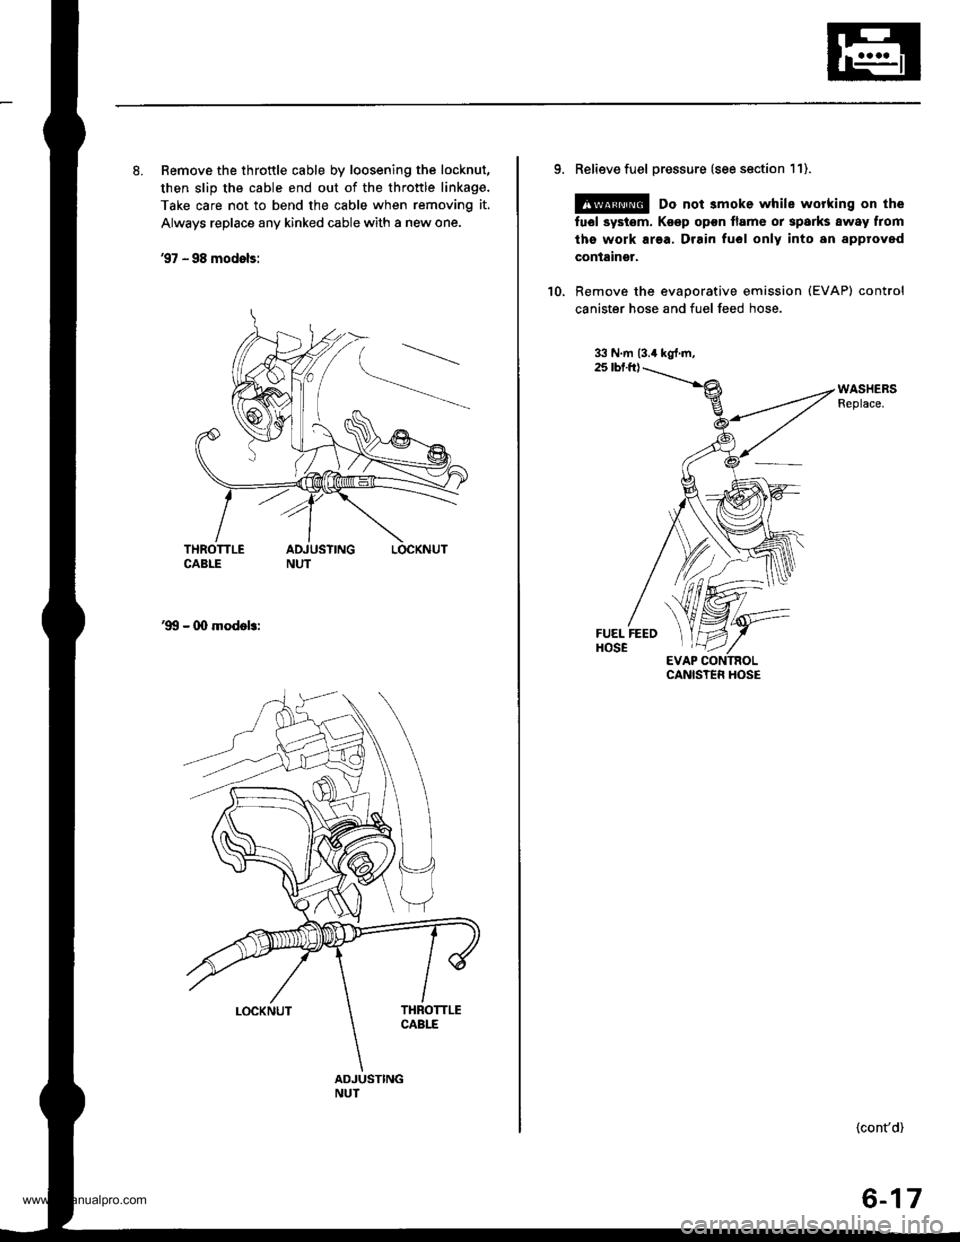 HONDA CR-V 2000 RD1-RD3 / 1.G Workshop Manual 
8. Remove the throttle cable by loosening the locknut,
then slip the cable end out of the throttle linkage.
Take care not to bend the cable when removing it.
Always replace any kinked cable with a ne